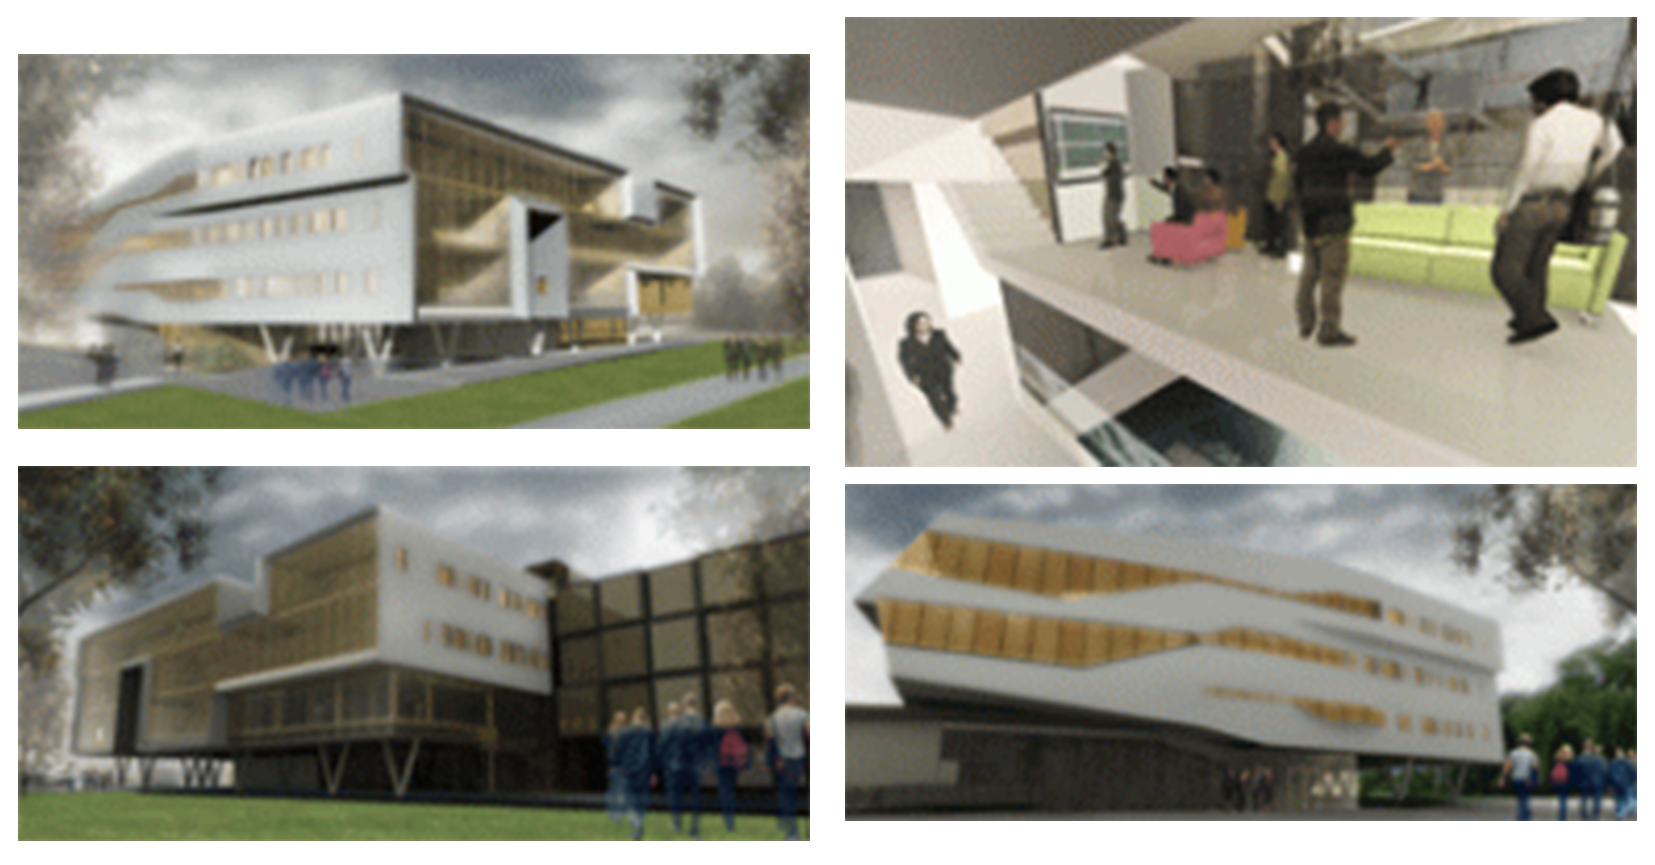 Building plans for the Stephen Hawkings centre at PI